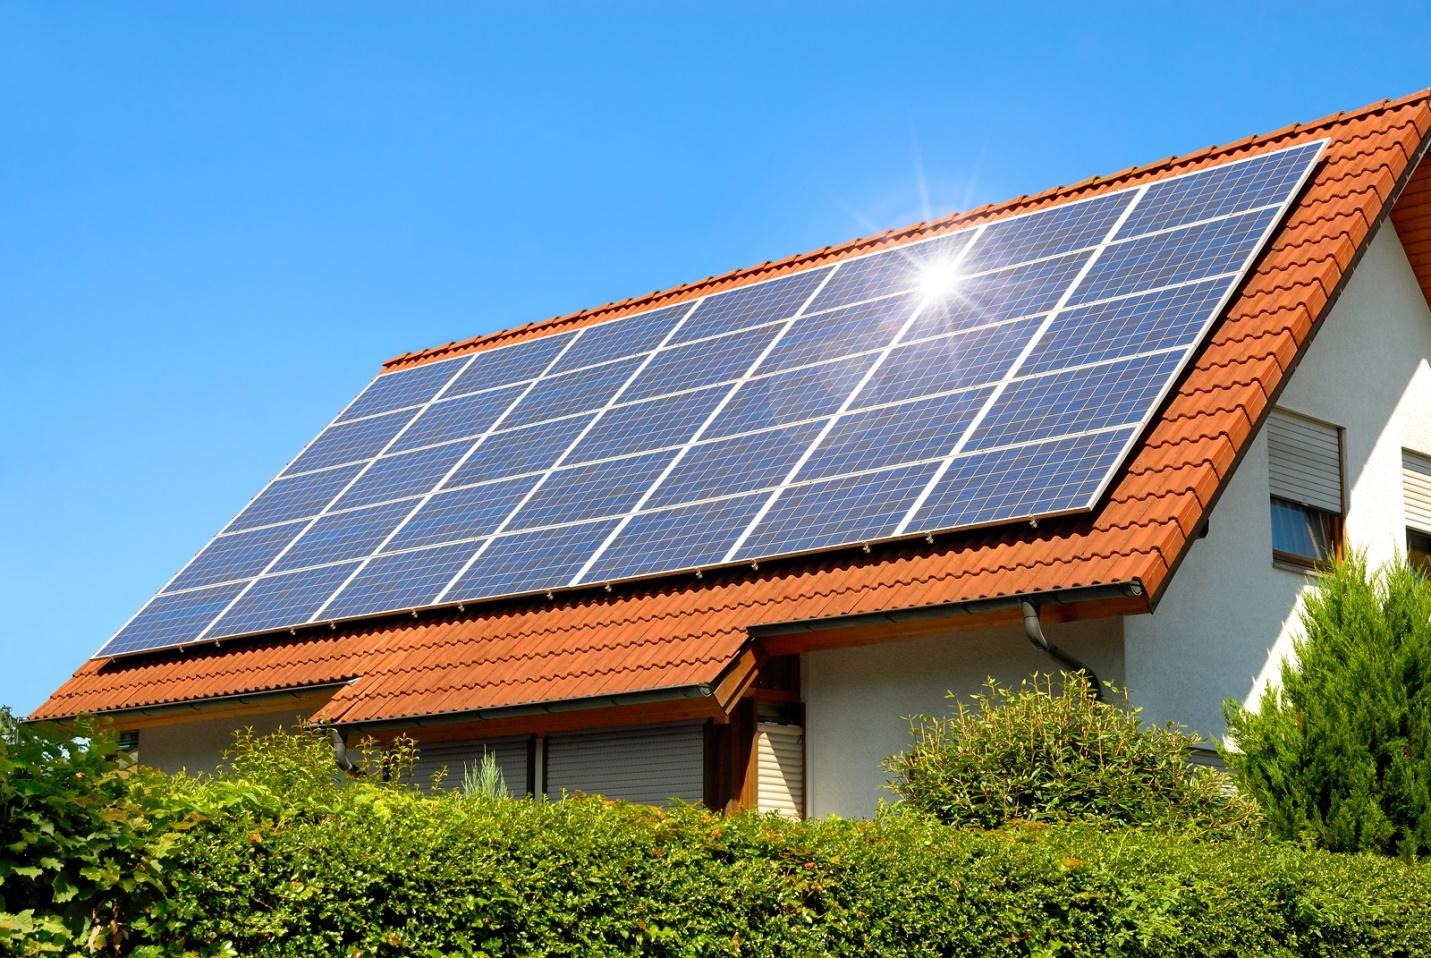 Finding The Right Solar Installers Toronto